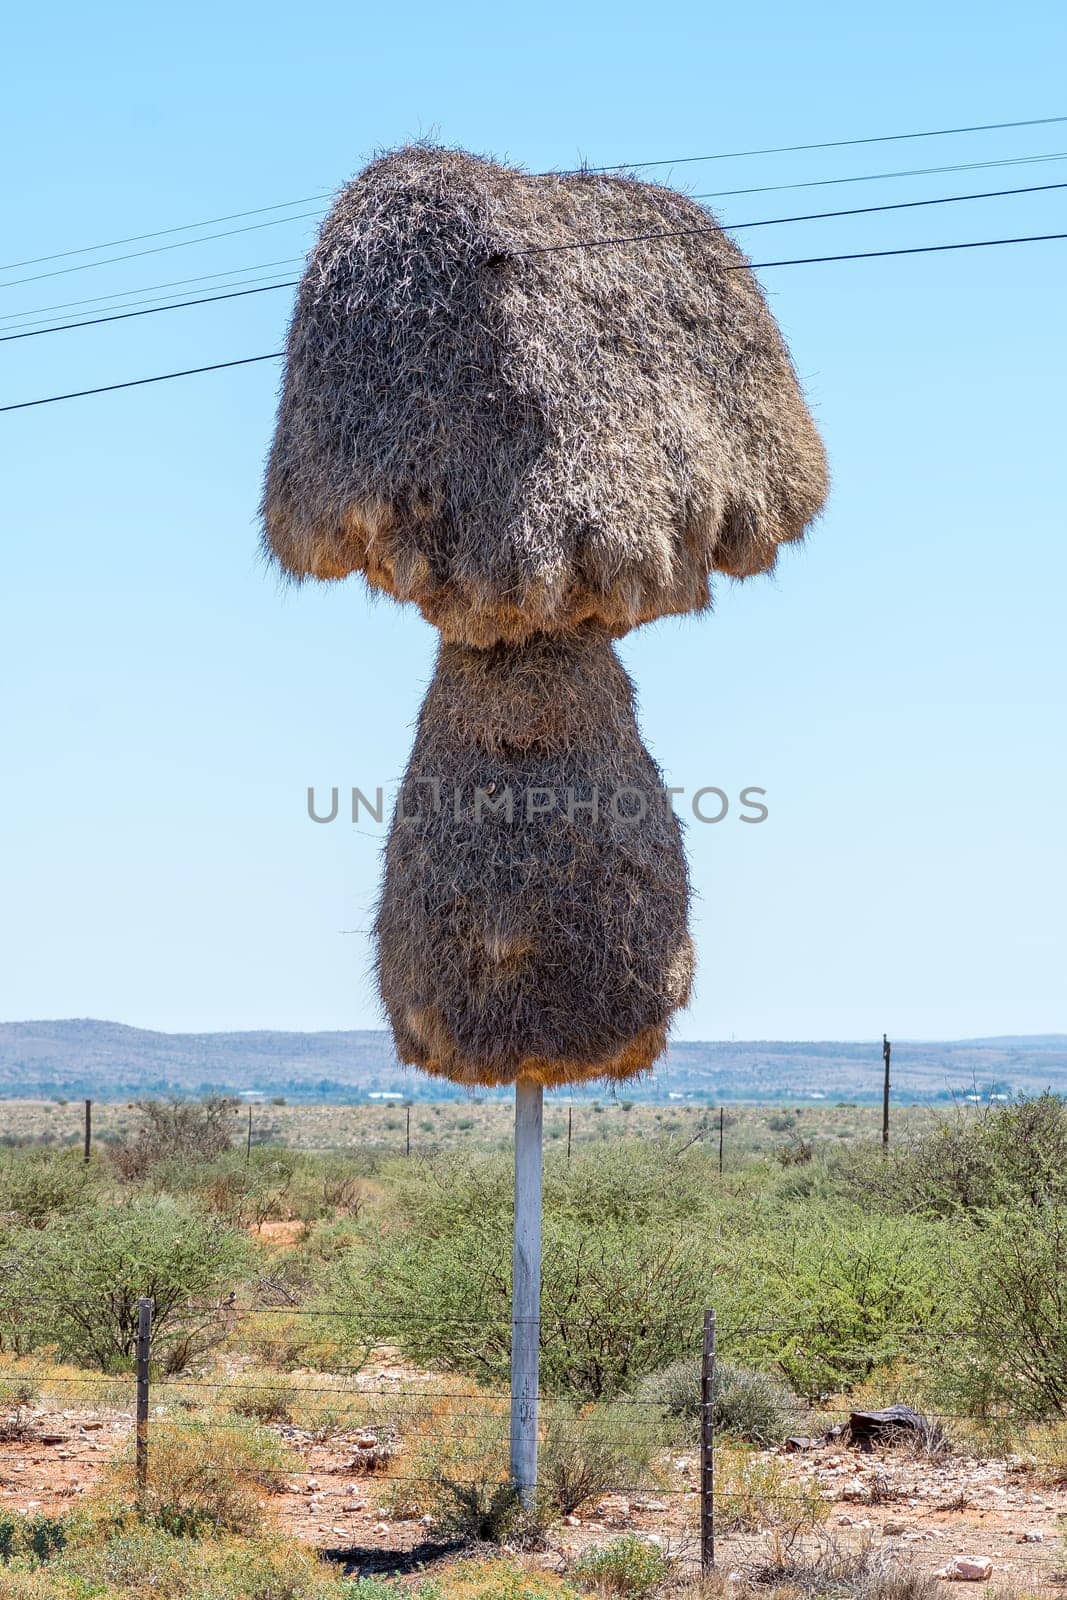 A community bird nest built on a telephone pole between Groblershoop and Upington in the Northern Cape Province of South Africa